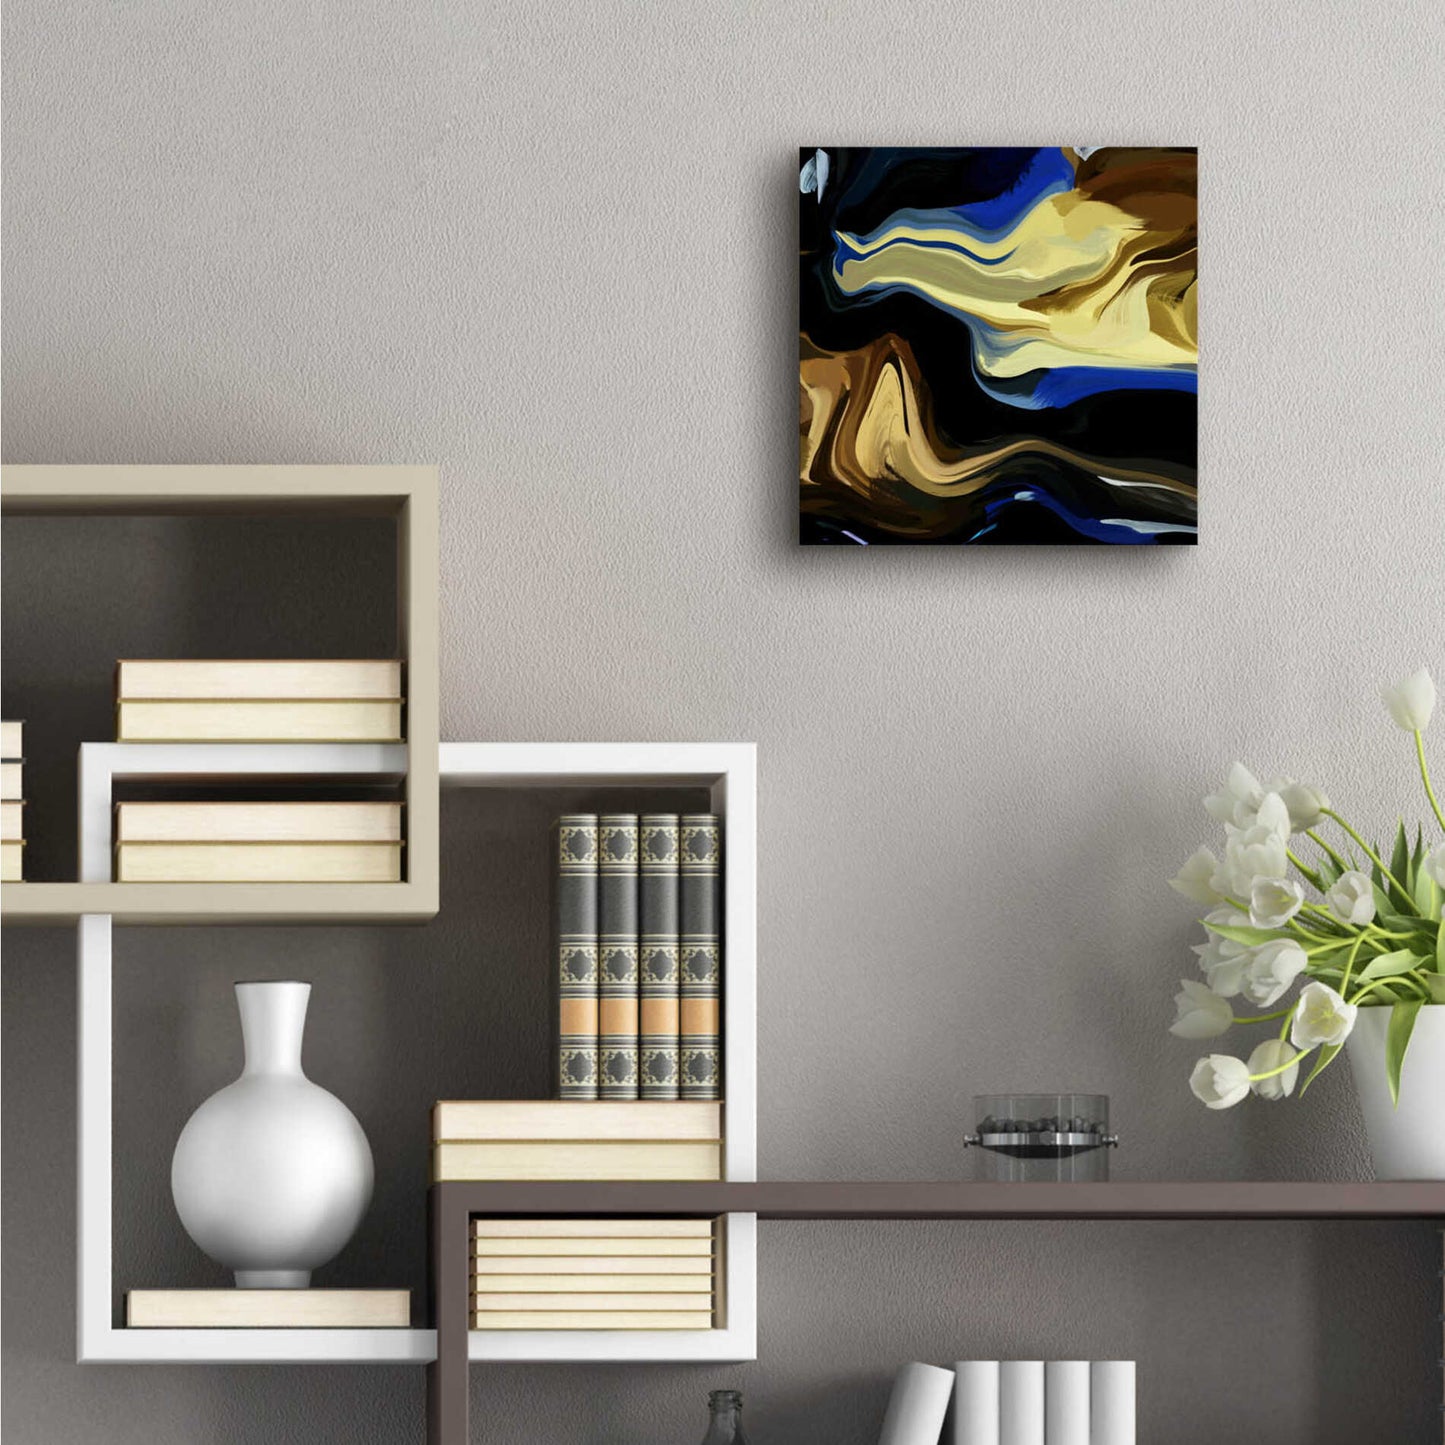 Epic Art 'Inverted Abstract Colorful Flows 16' by Irena Orlov Acrylic Glass Wall Art,12x12